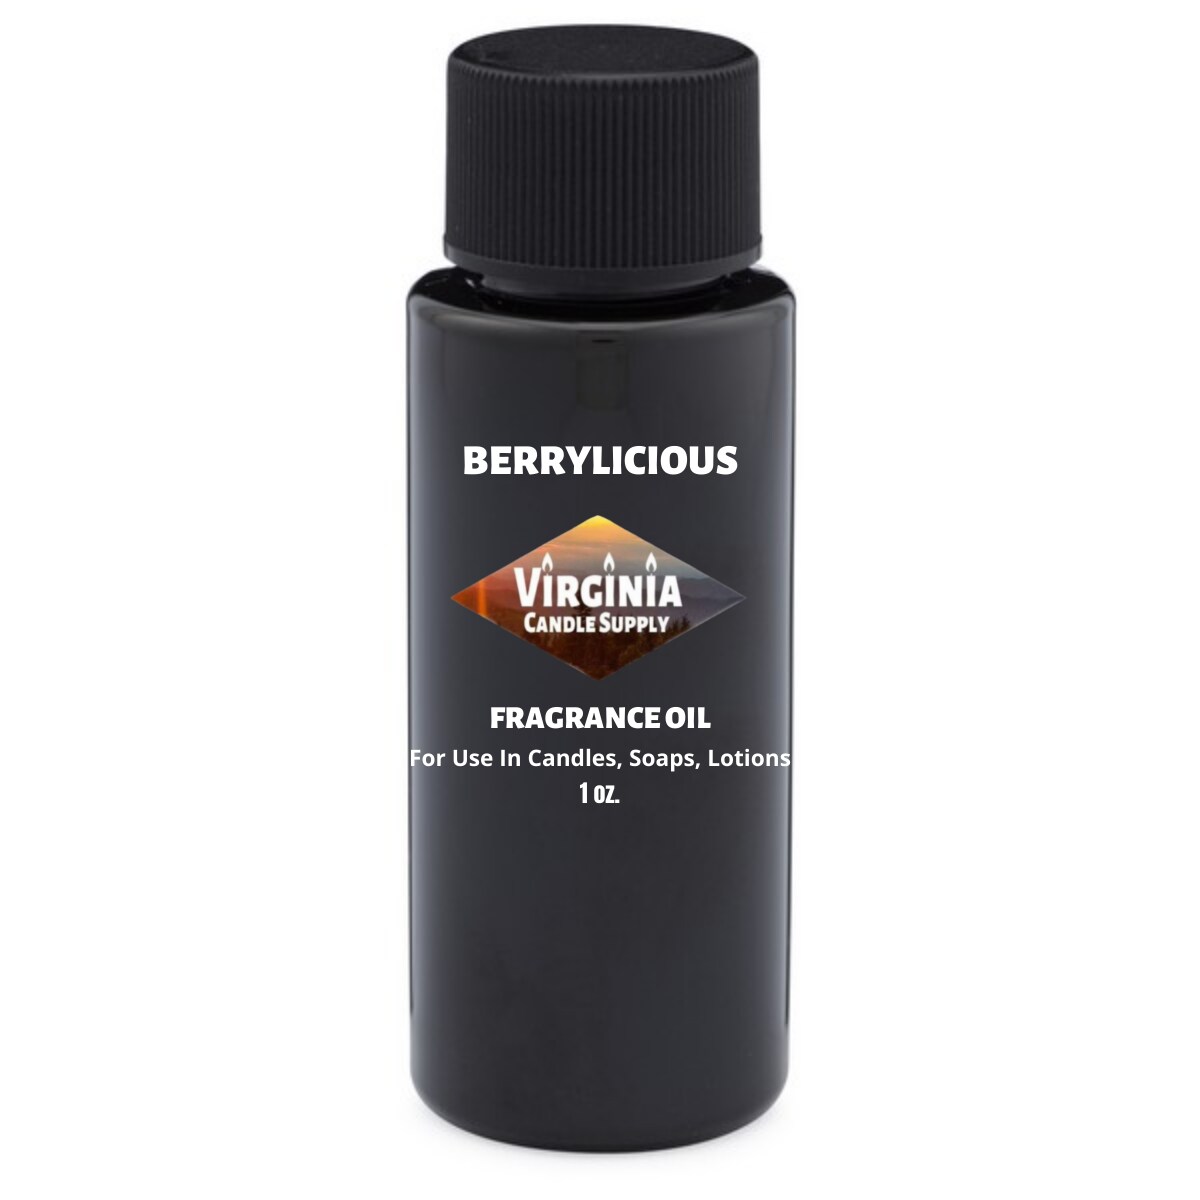 Berrylicious Fragrance Oil (Our Version of the Brand Name) (1 oz Bottle) for Candle Making, Soap Making, Tart Making, Room Sprays, Lotions, Car Fresheners, Slime, Bath Bombs, Warmers…